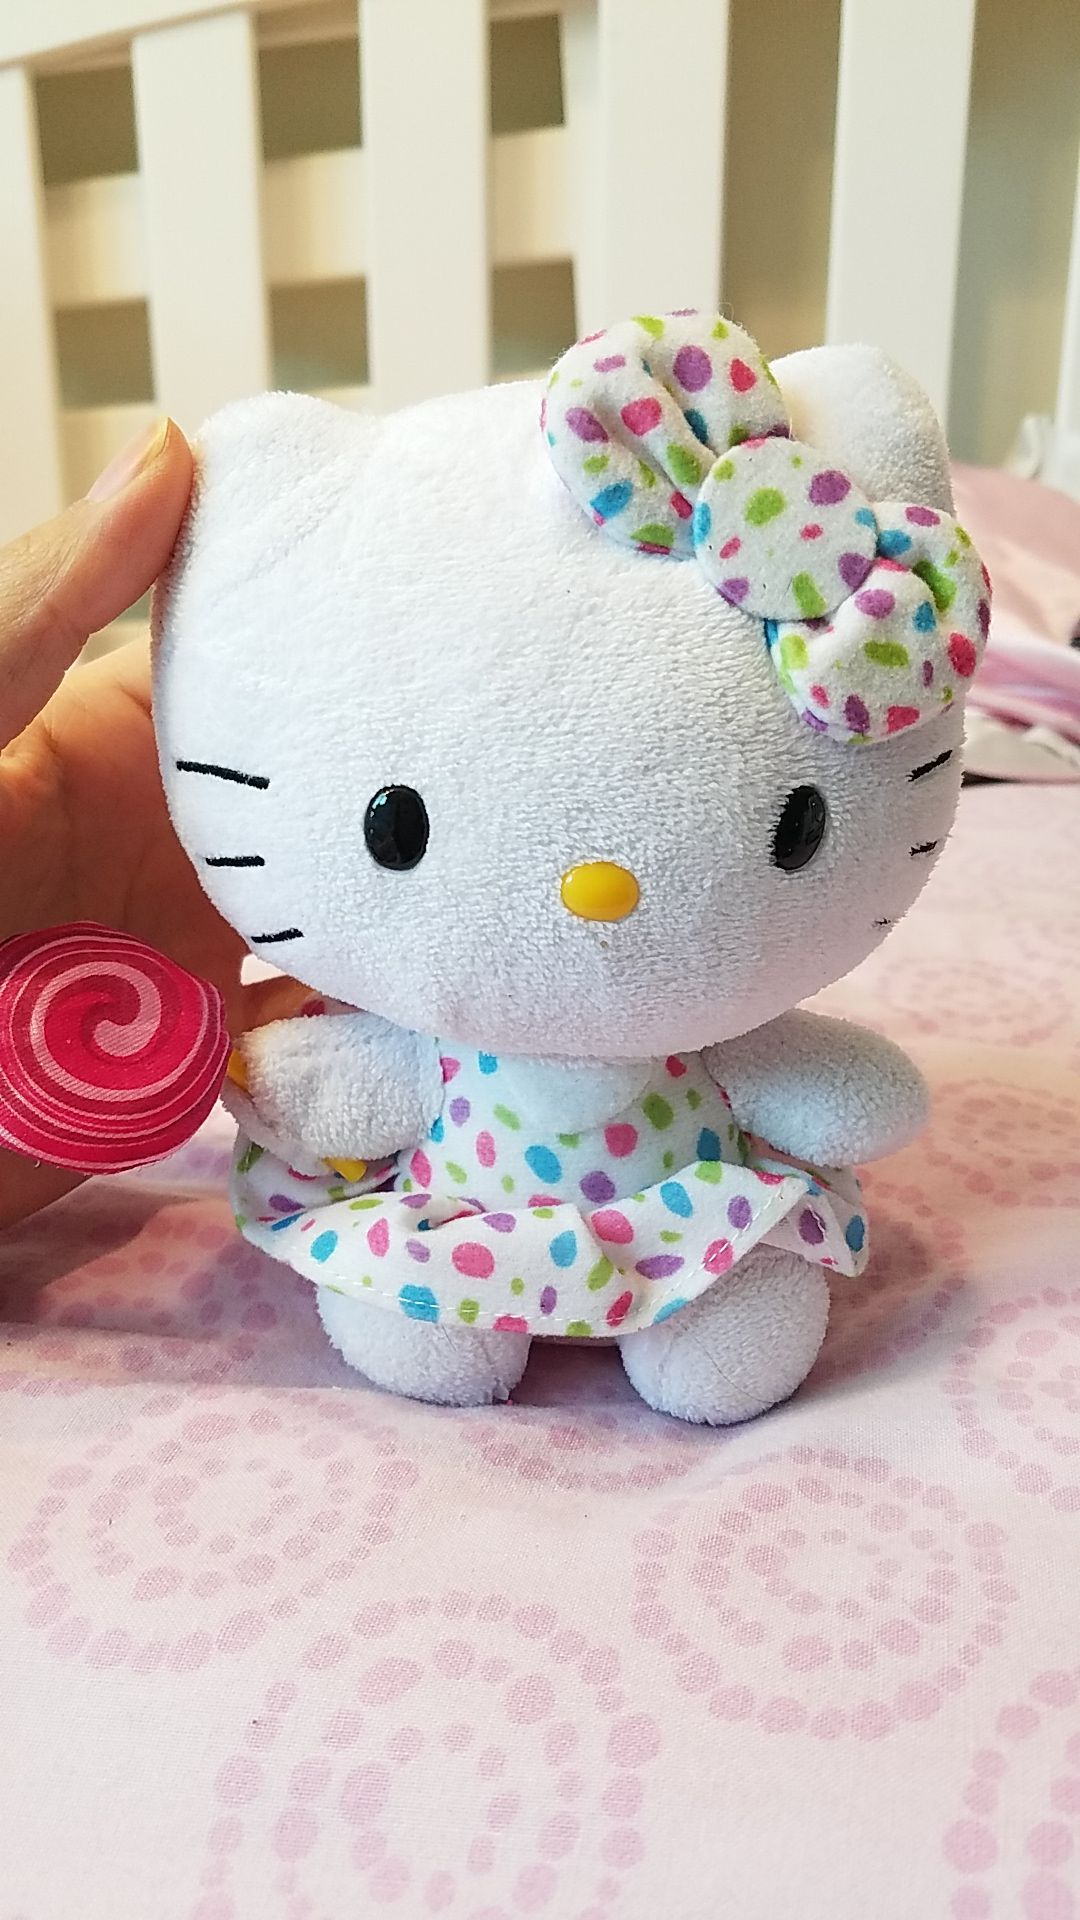 Small hello kitty plush with lollipop